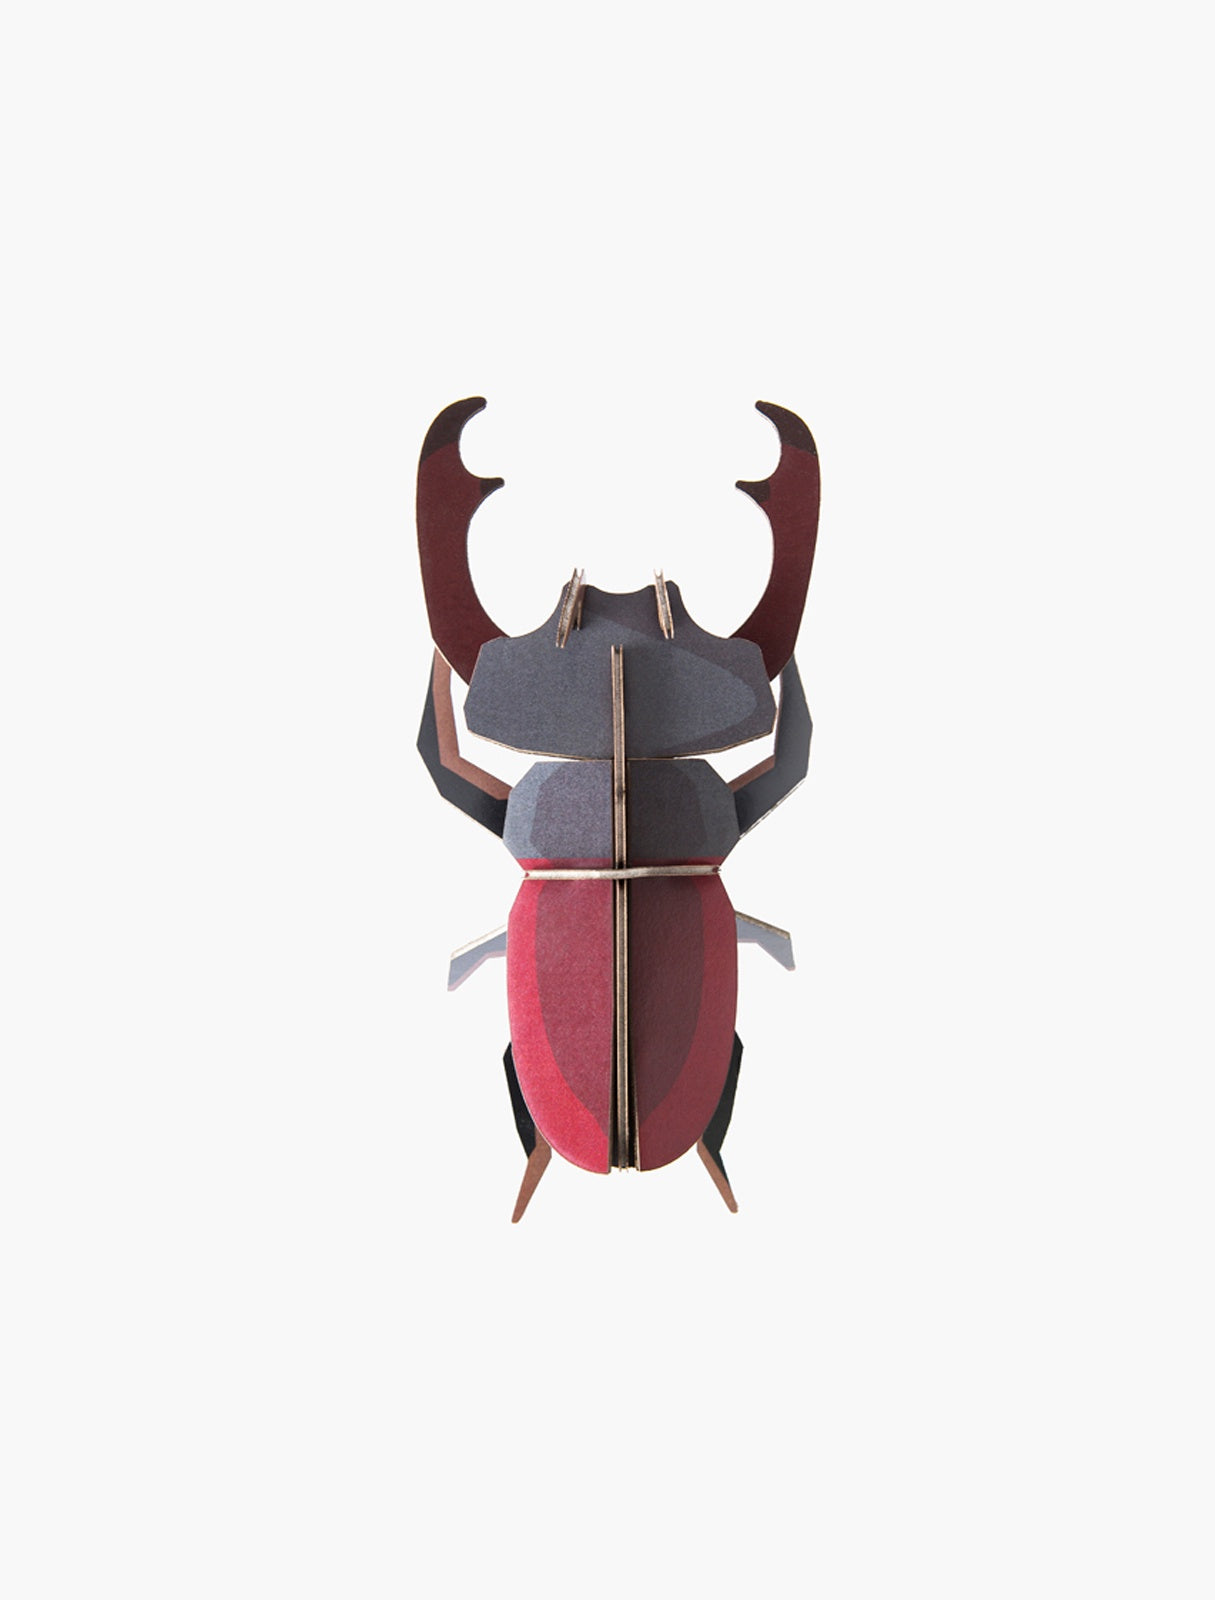 Studio Roof Wall Decor - Stag Beetle